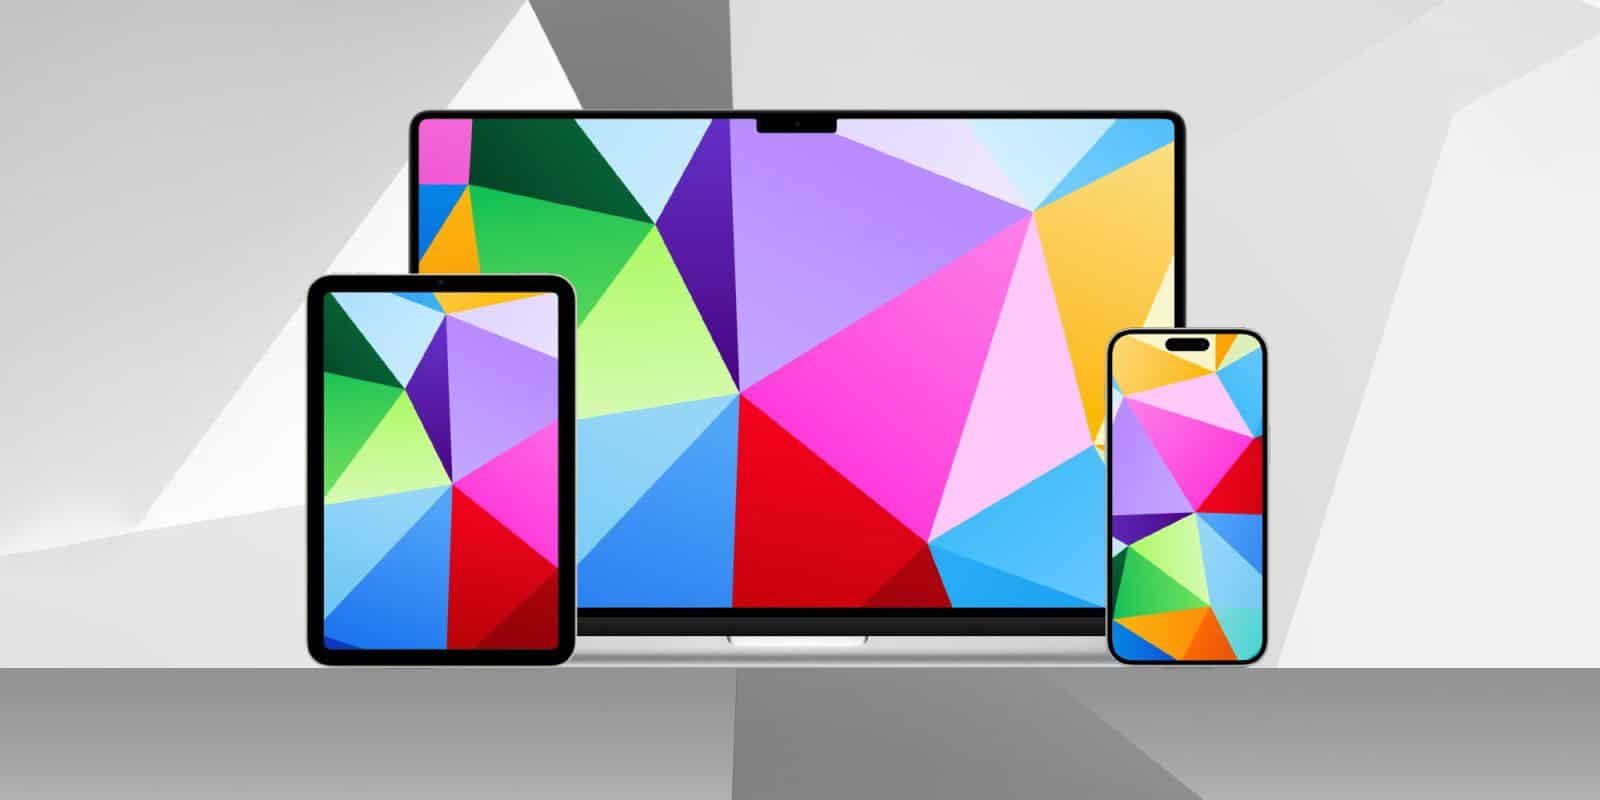 Basic Apple Guy Unveils Striking Geometric Wallpaper Collection for Apple Devices